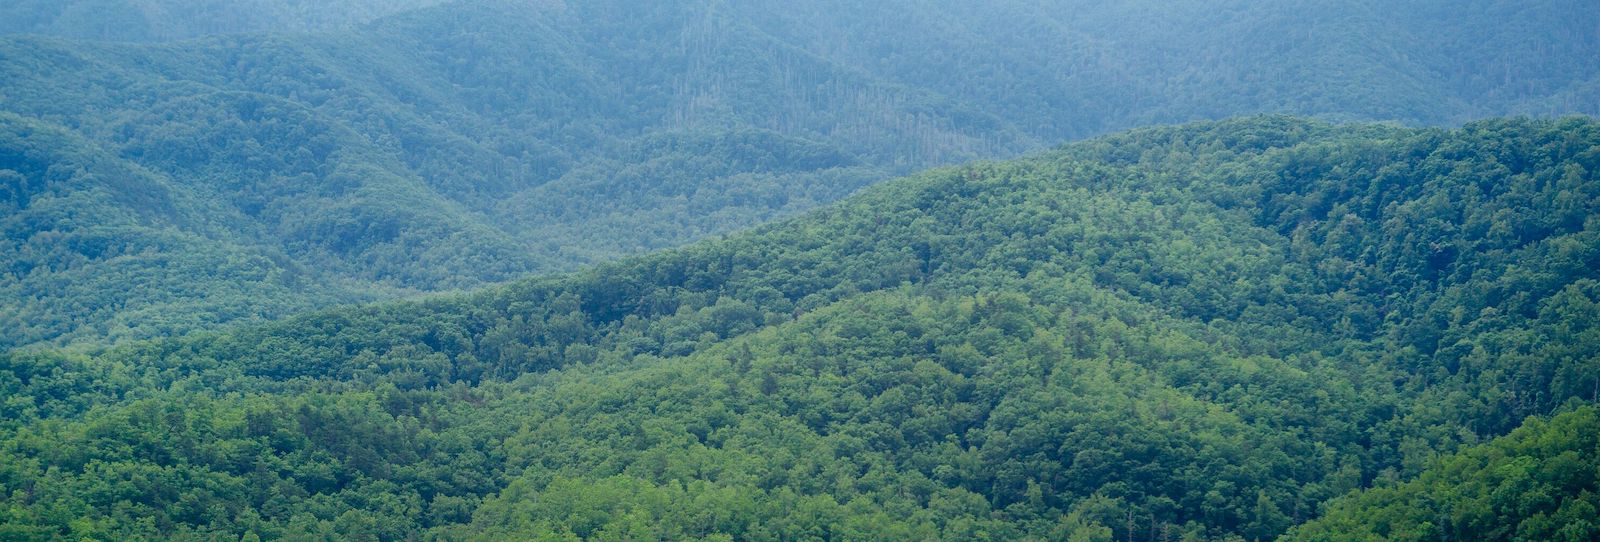 Top 4 Reasons Why Our Ziplines Offer the Best Views in the Smoky Mountains